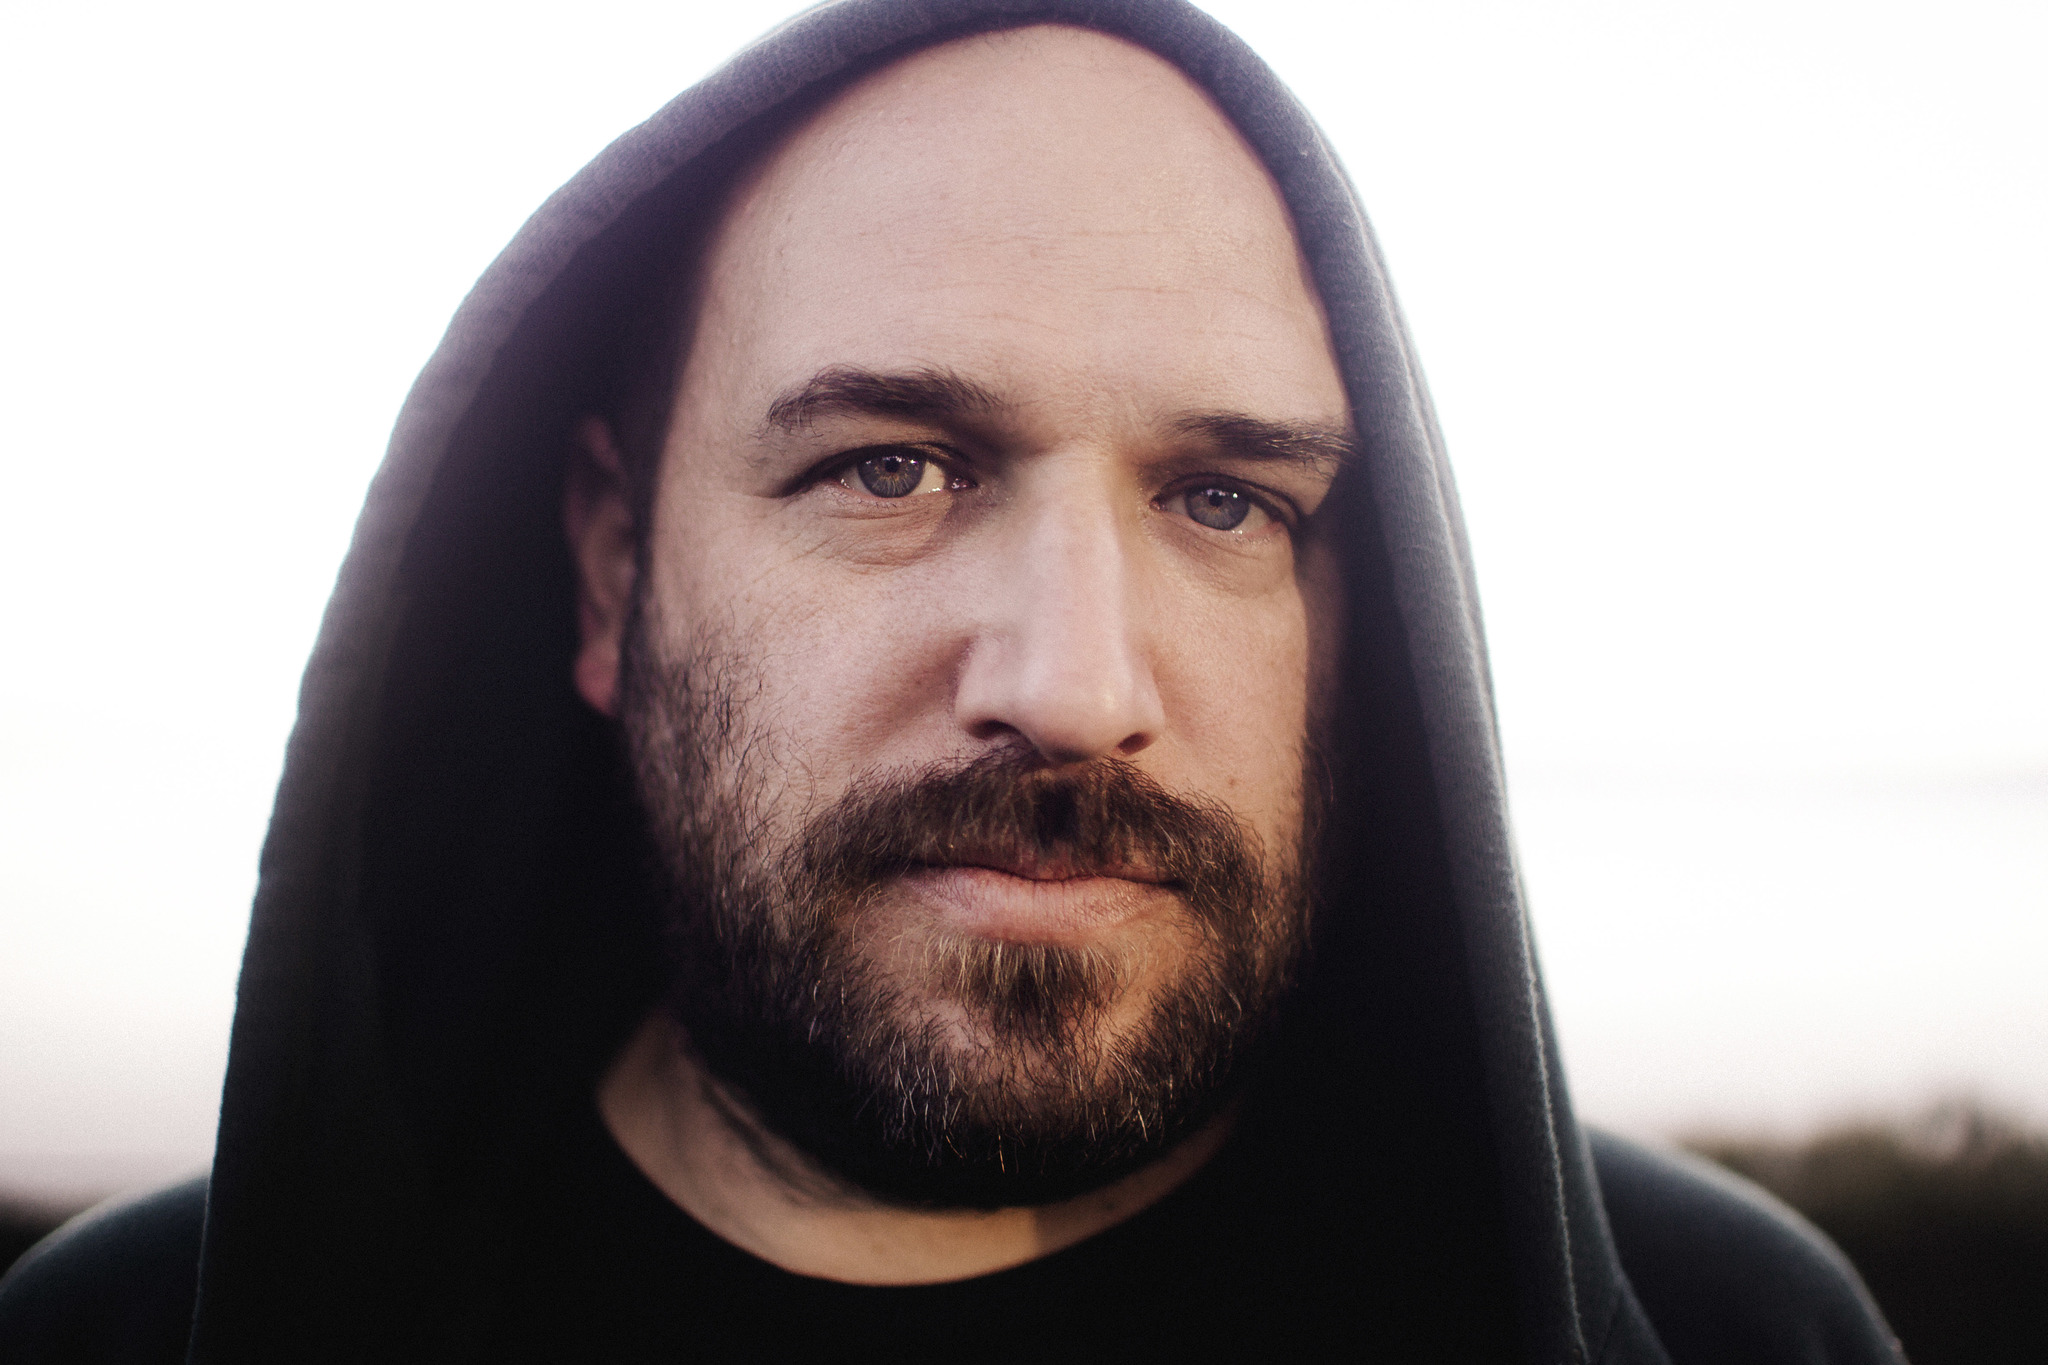 David Bazan Learns to Let Go